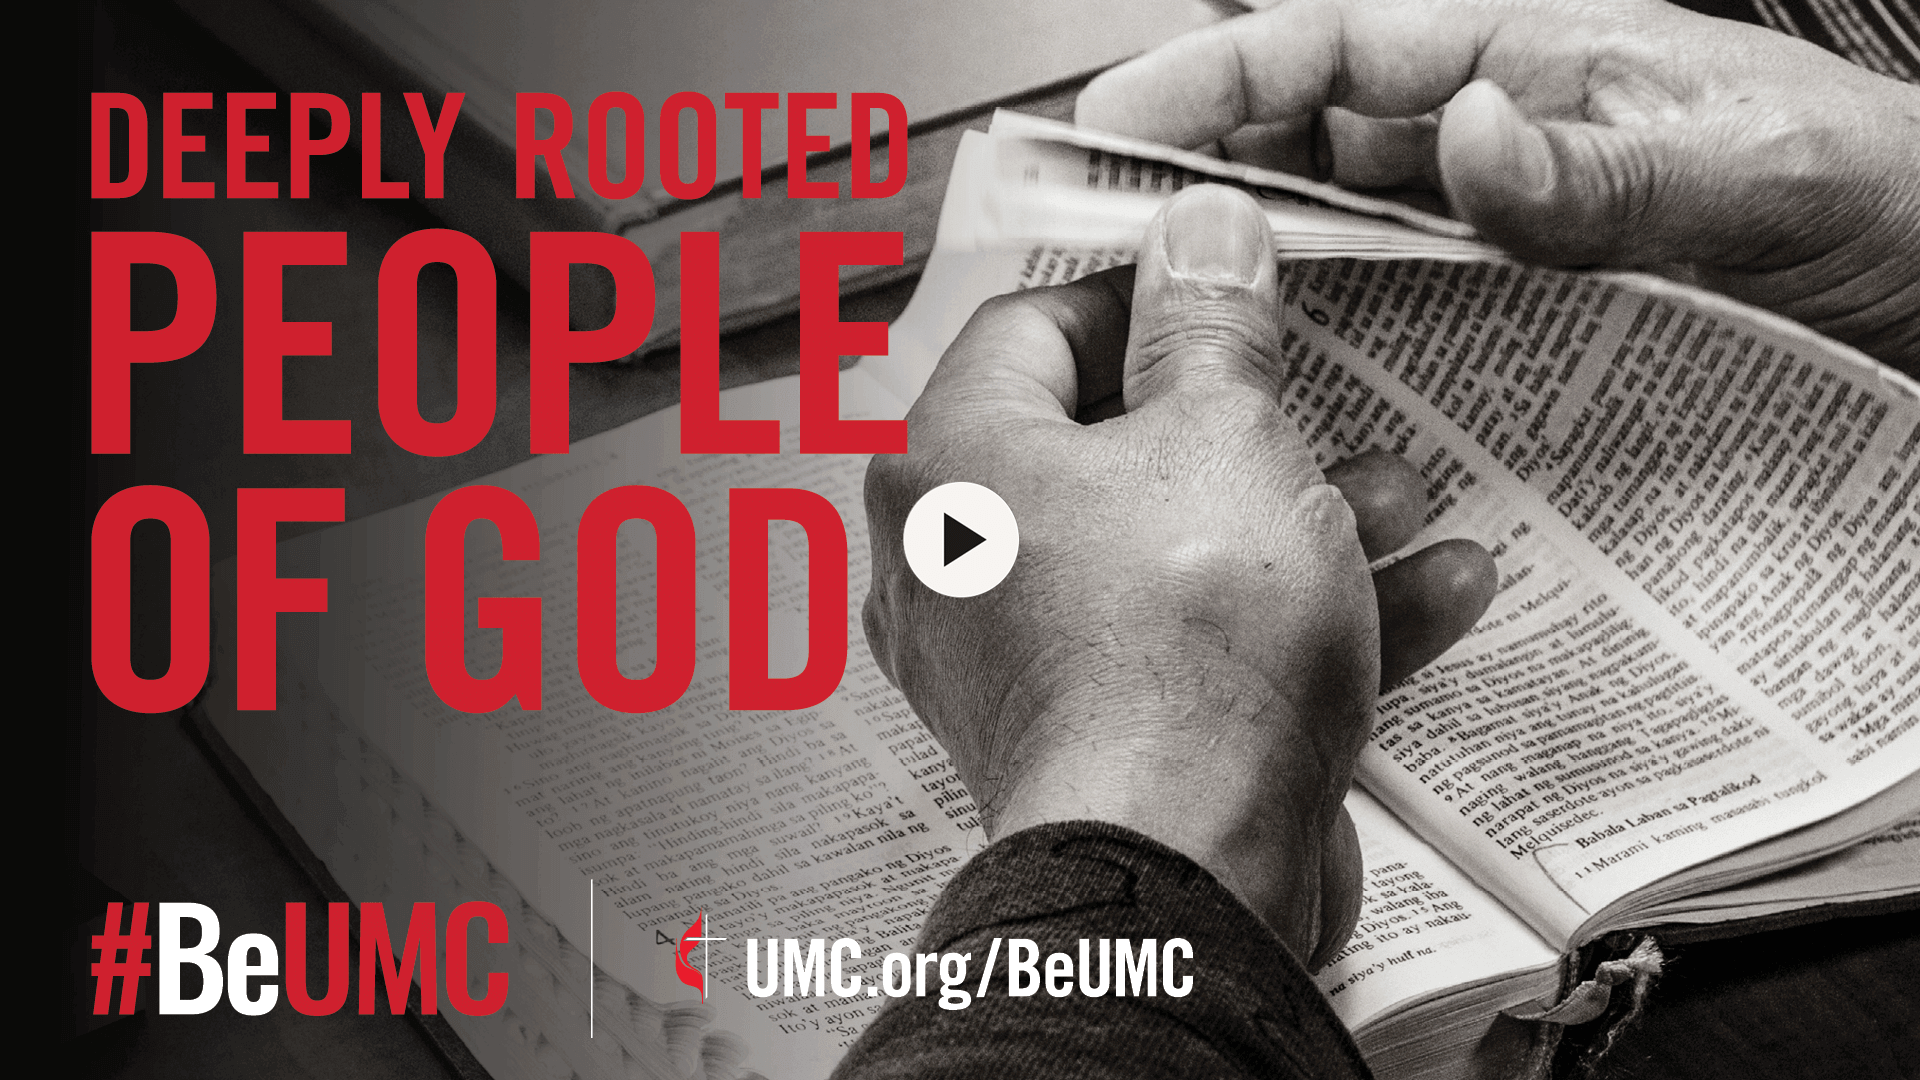 We find commonality in our rich history, sacraments and values. The #BeUMC campaign reminds us of who we are at our best — the spirit-filled, resilient, connected, missional, faithful, diverse, deeply rooted, committed, disciple-making, Jesus-seeking, generous, justice-seeking, world-changing people of God called The United Methodist Church. Video screenshot..